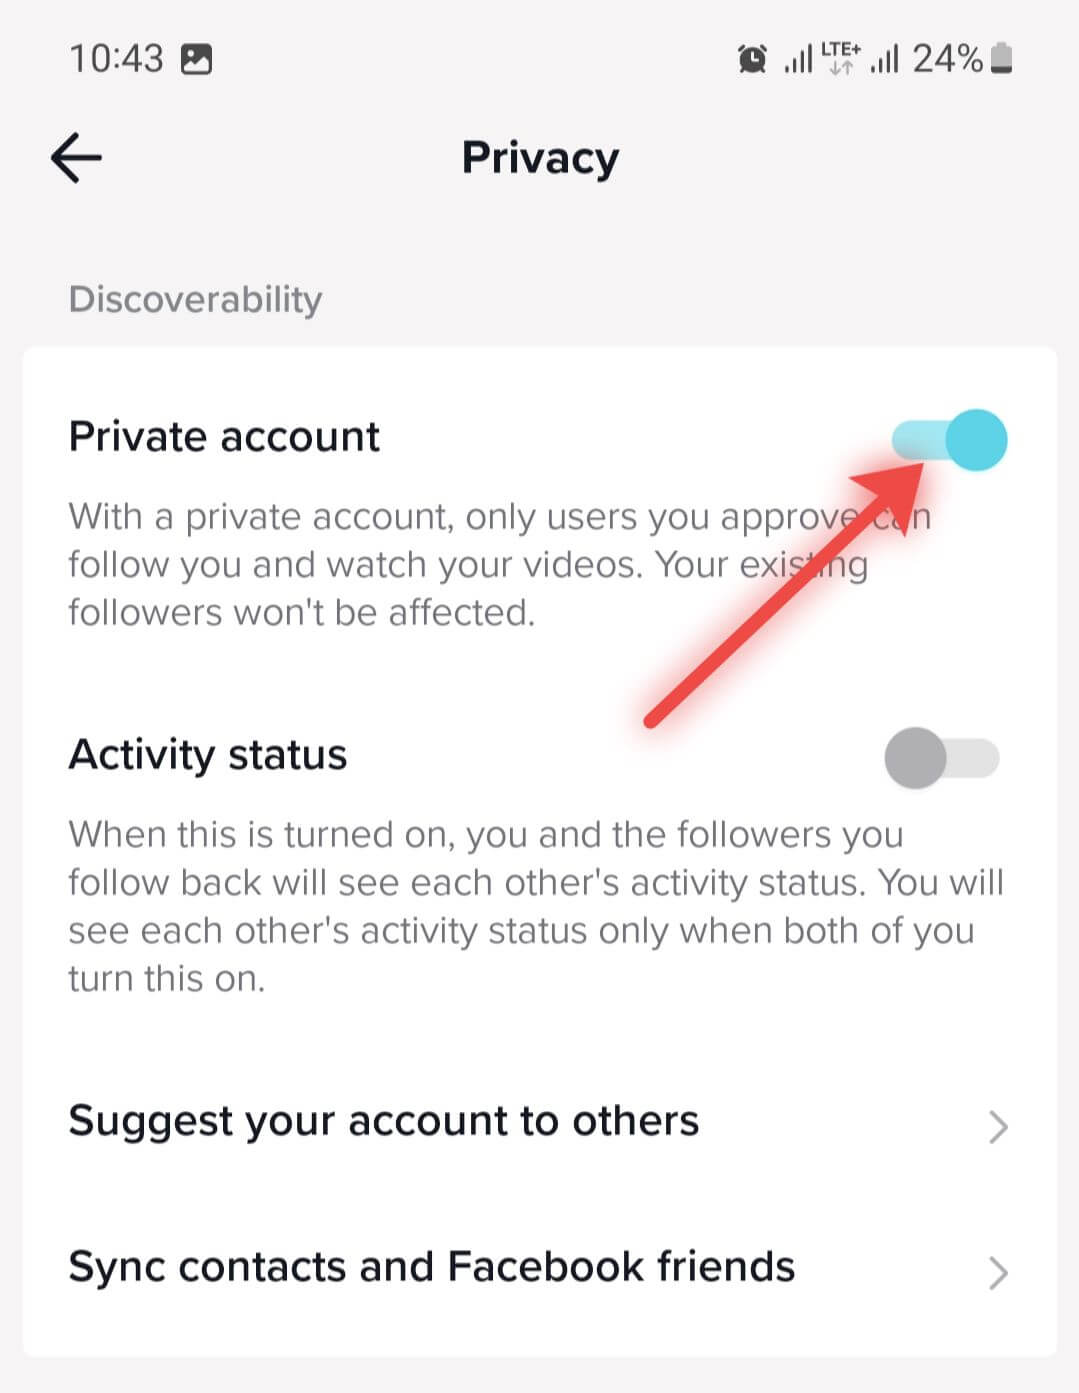 turn off the Private Account option